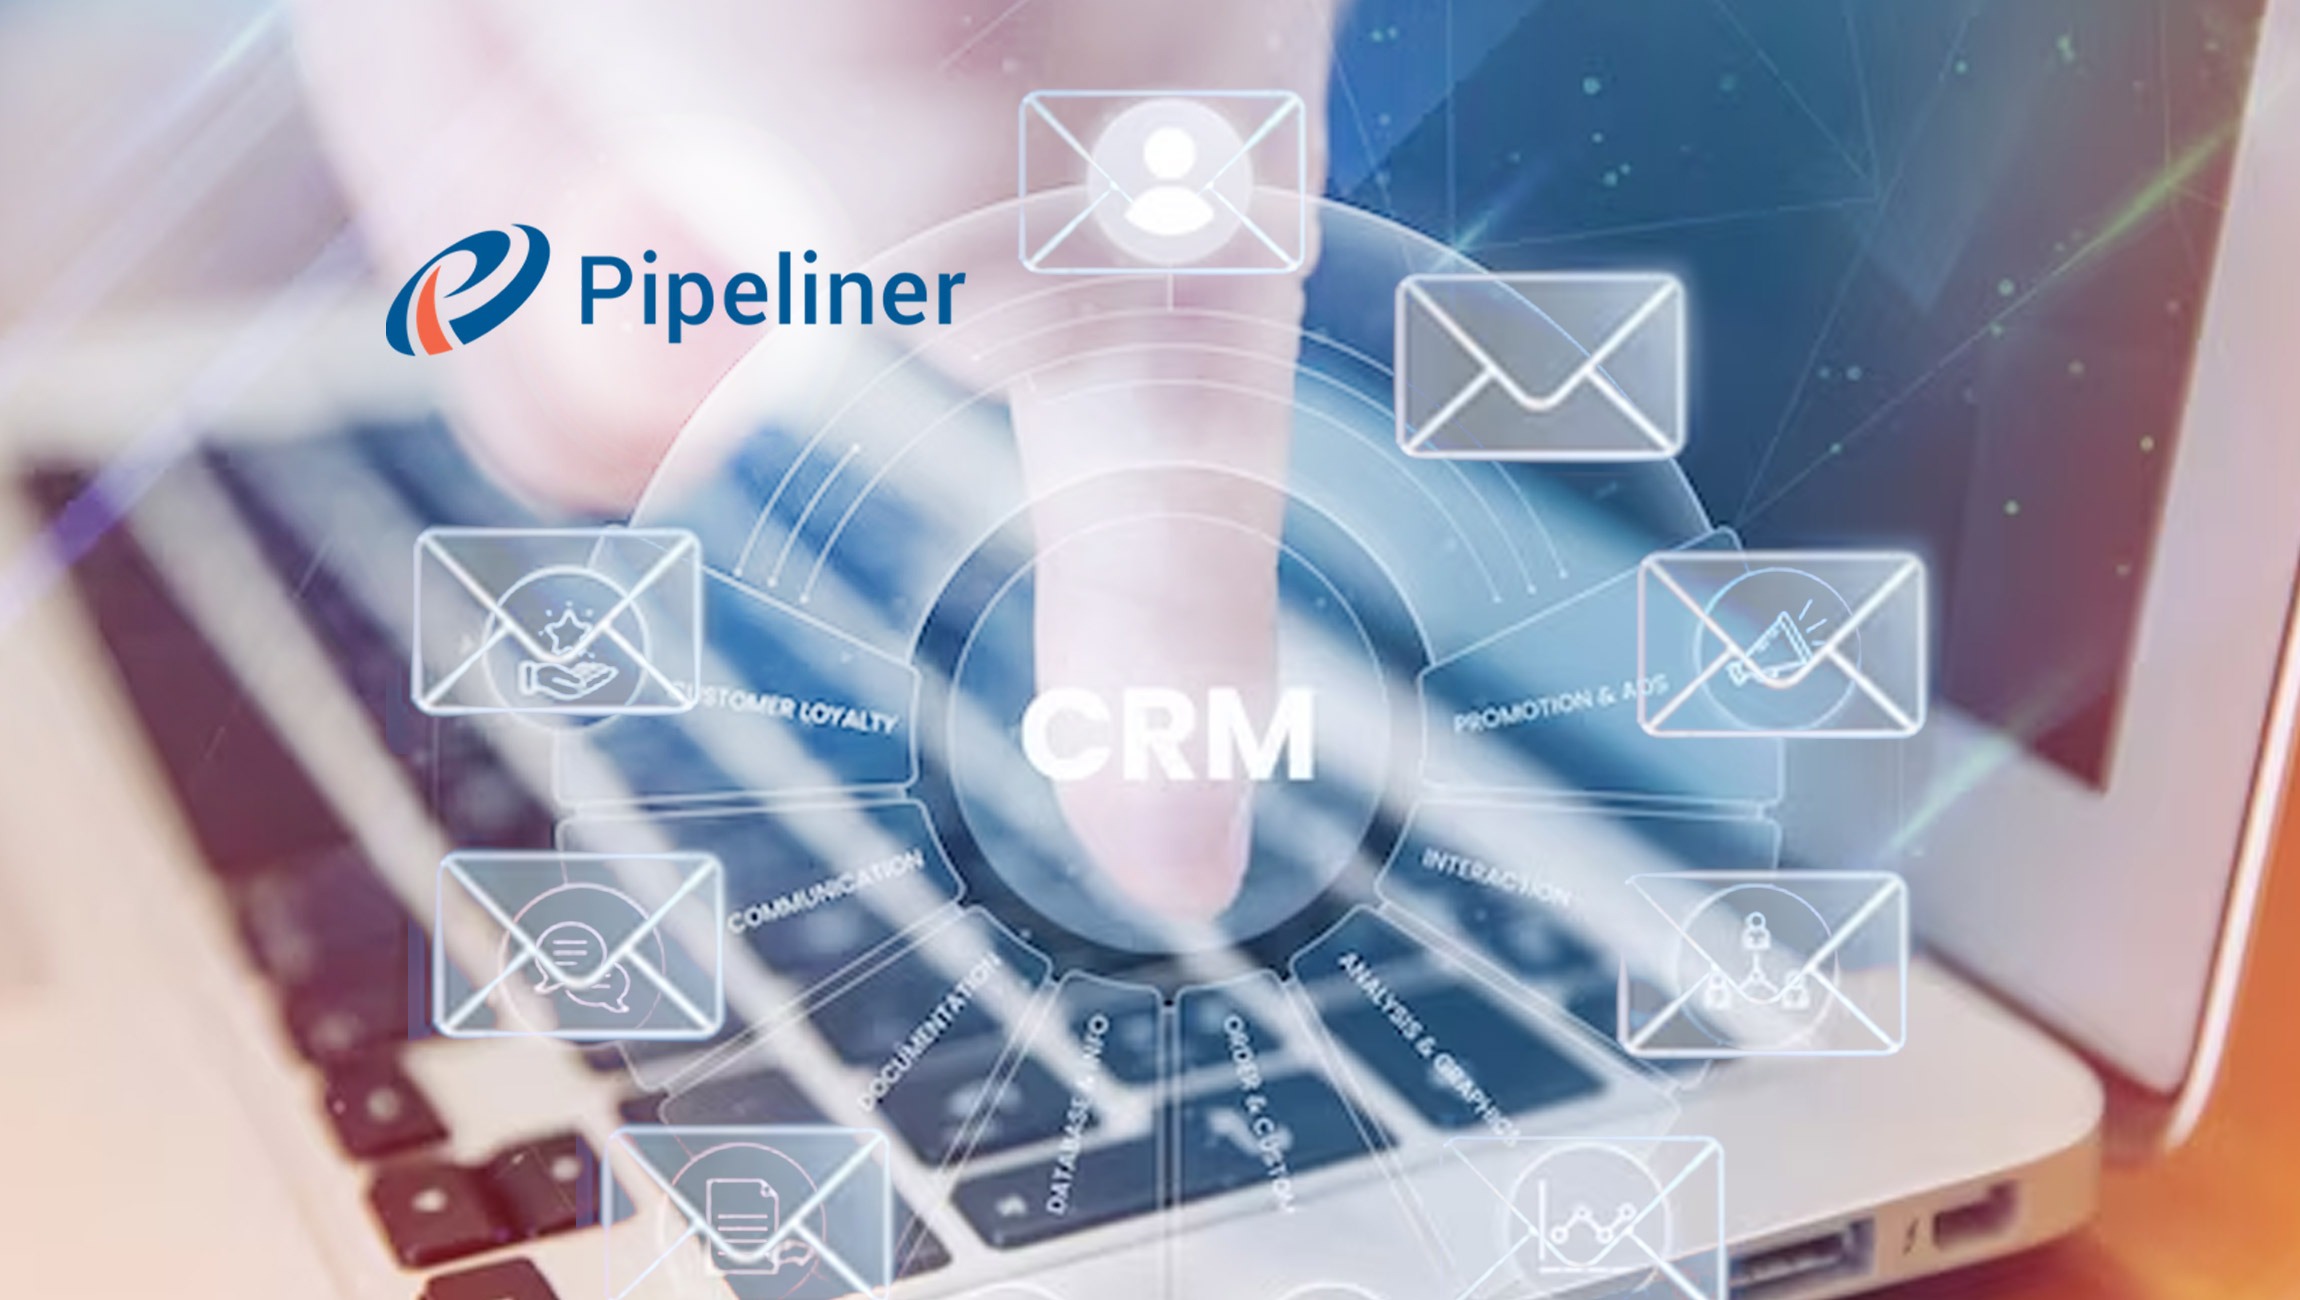 Pipeliner-CRM-Makes-Voyager-AI-Email-Assistant-Free-for-All-Users